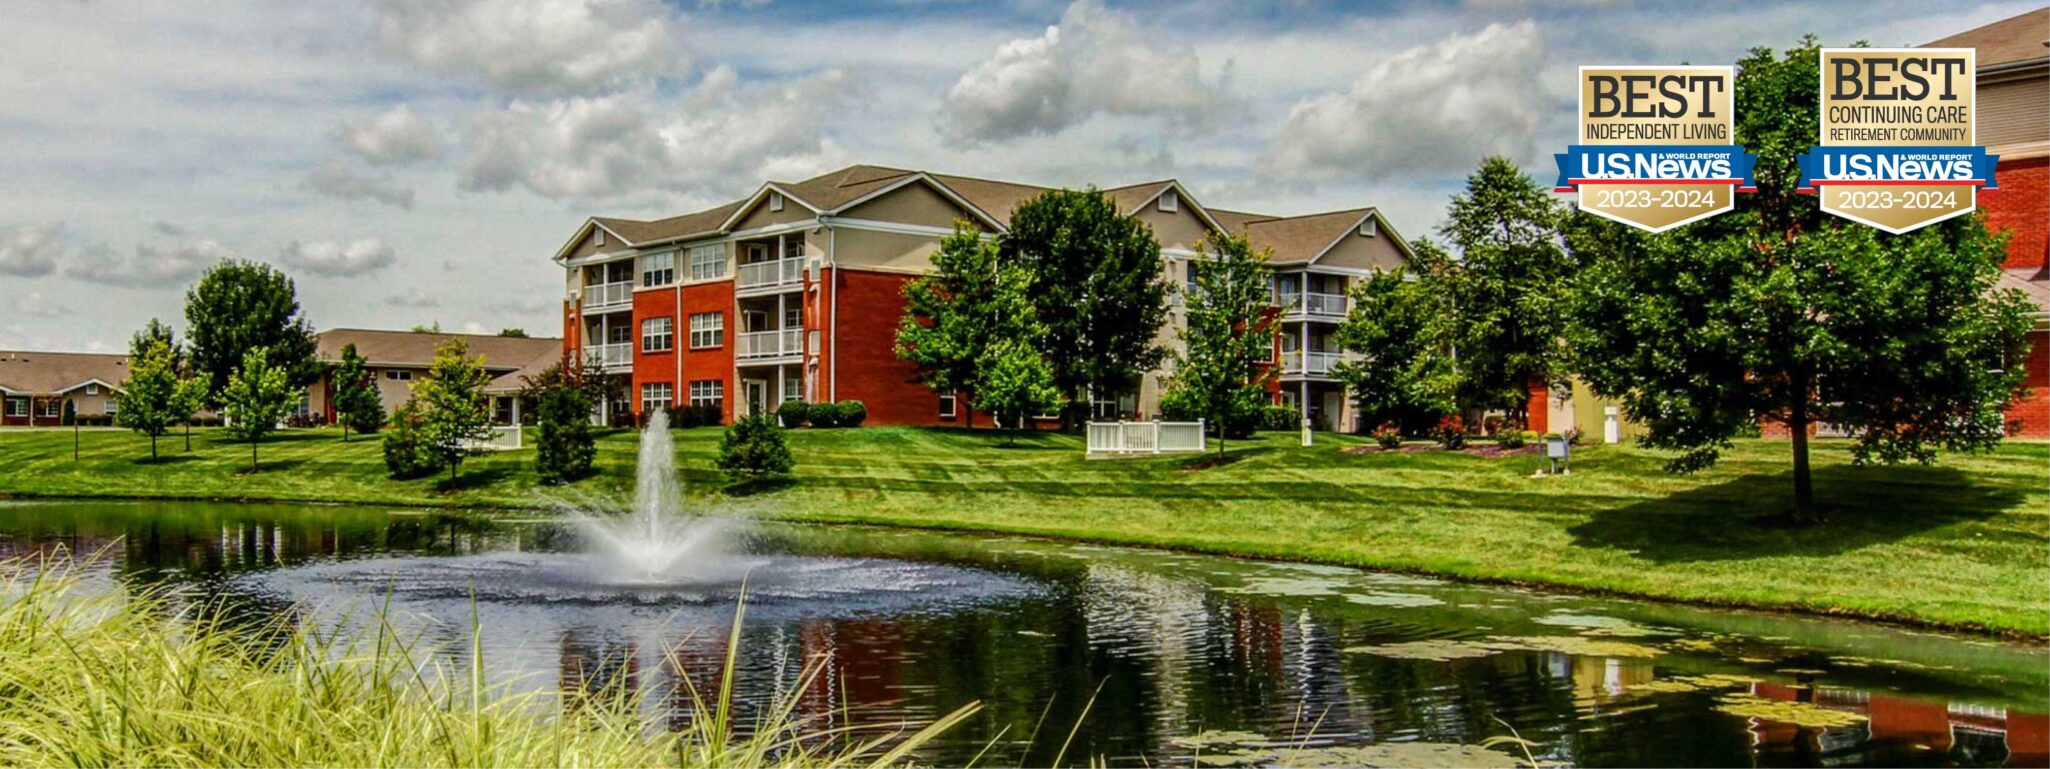 A look at the Meridian Village assisted living community in Glen Carbon, IL, awarded Best Independent Living and Continuing Care Retirement Community by US News.